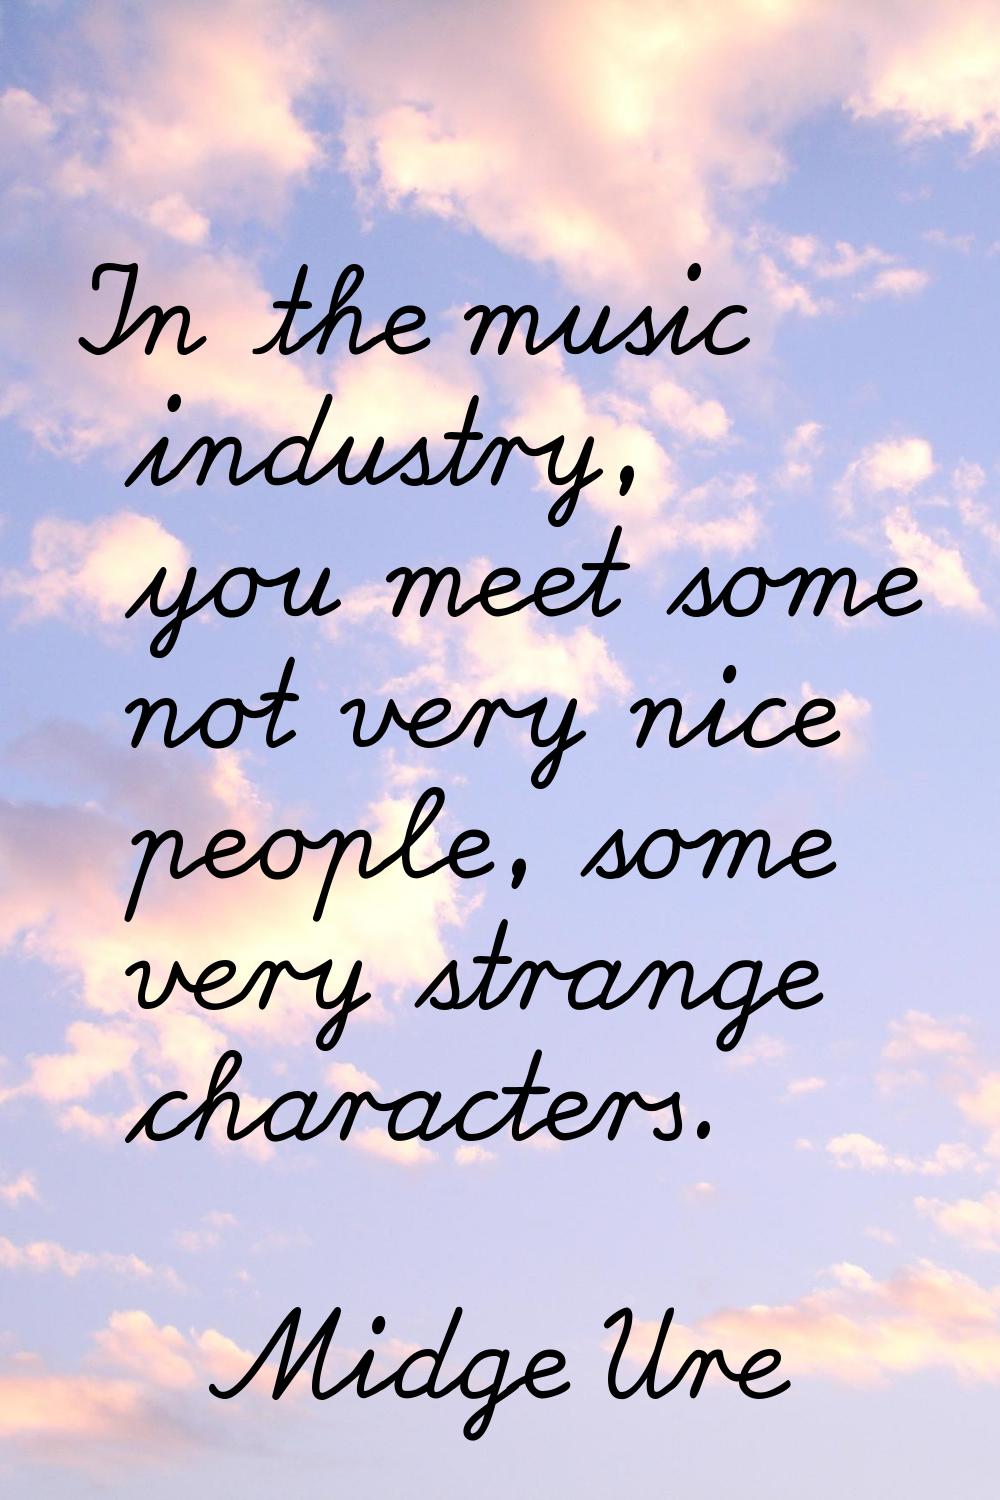 In the music industry, you meet some not very nice people, some very strange characters.